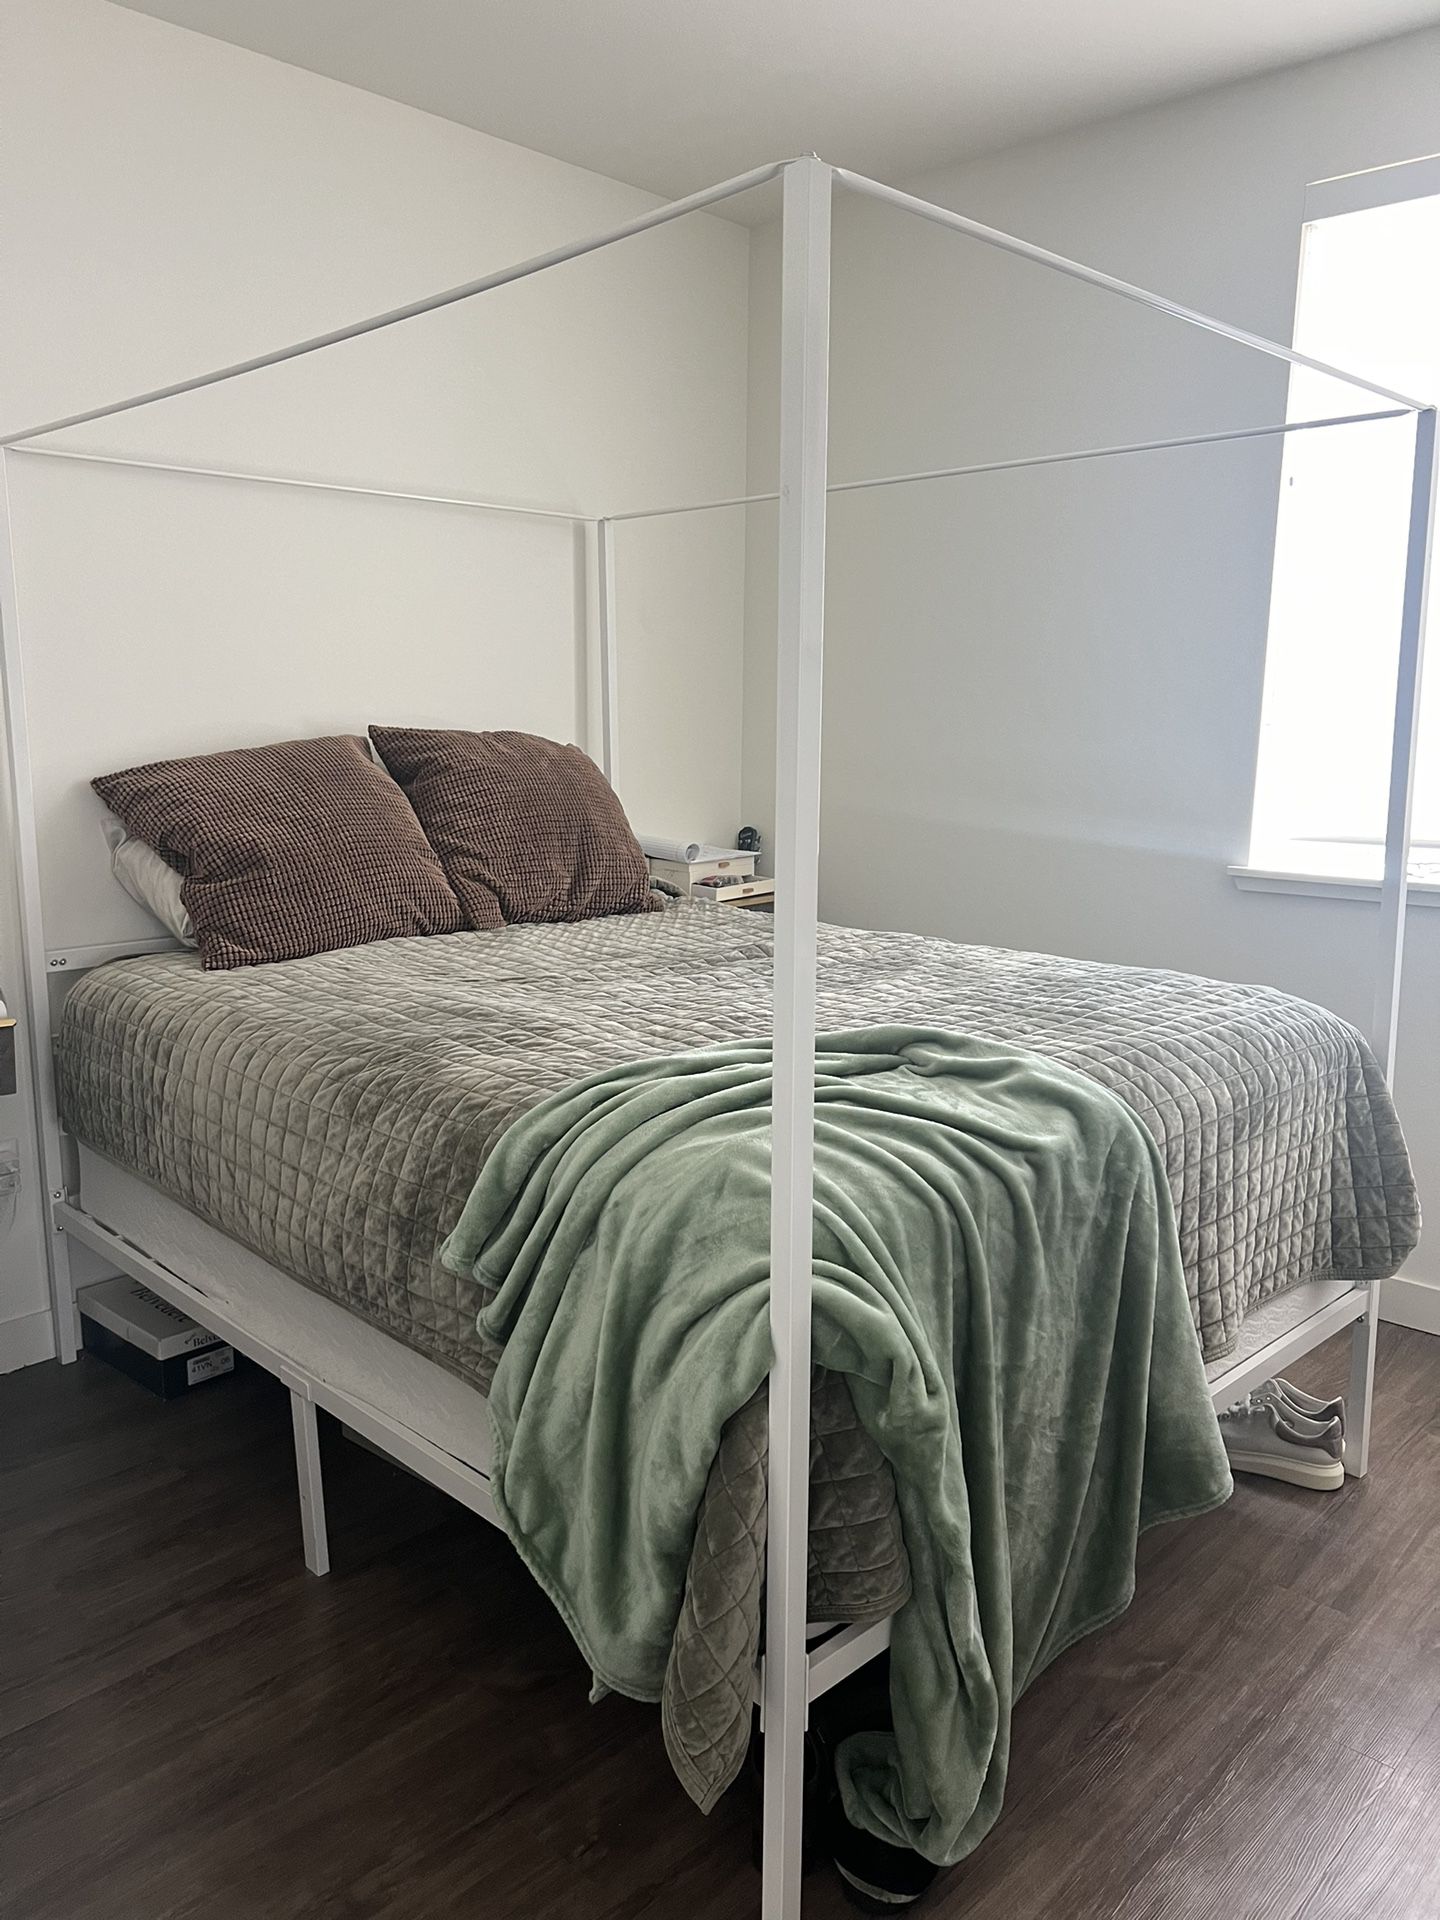 Canopy Queen Bed Frame